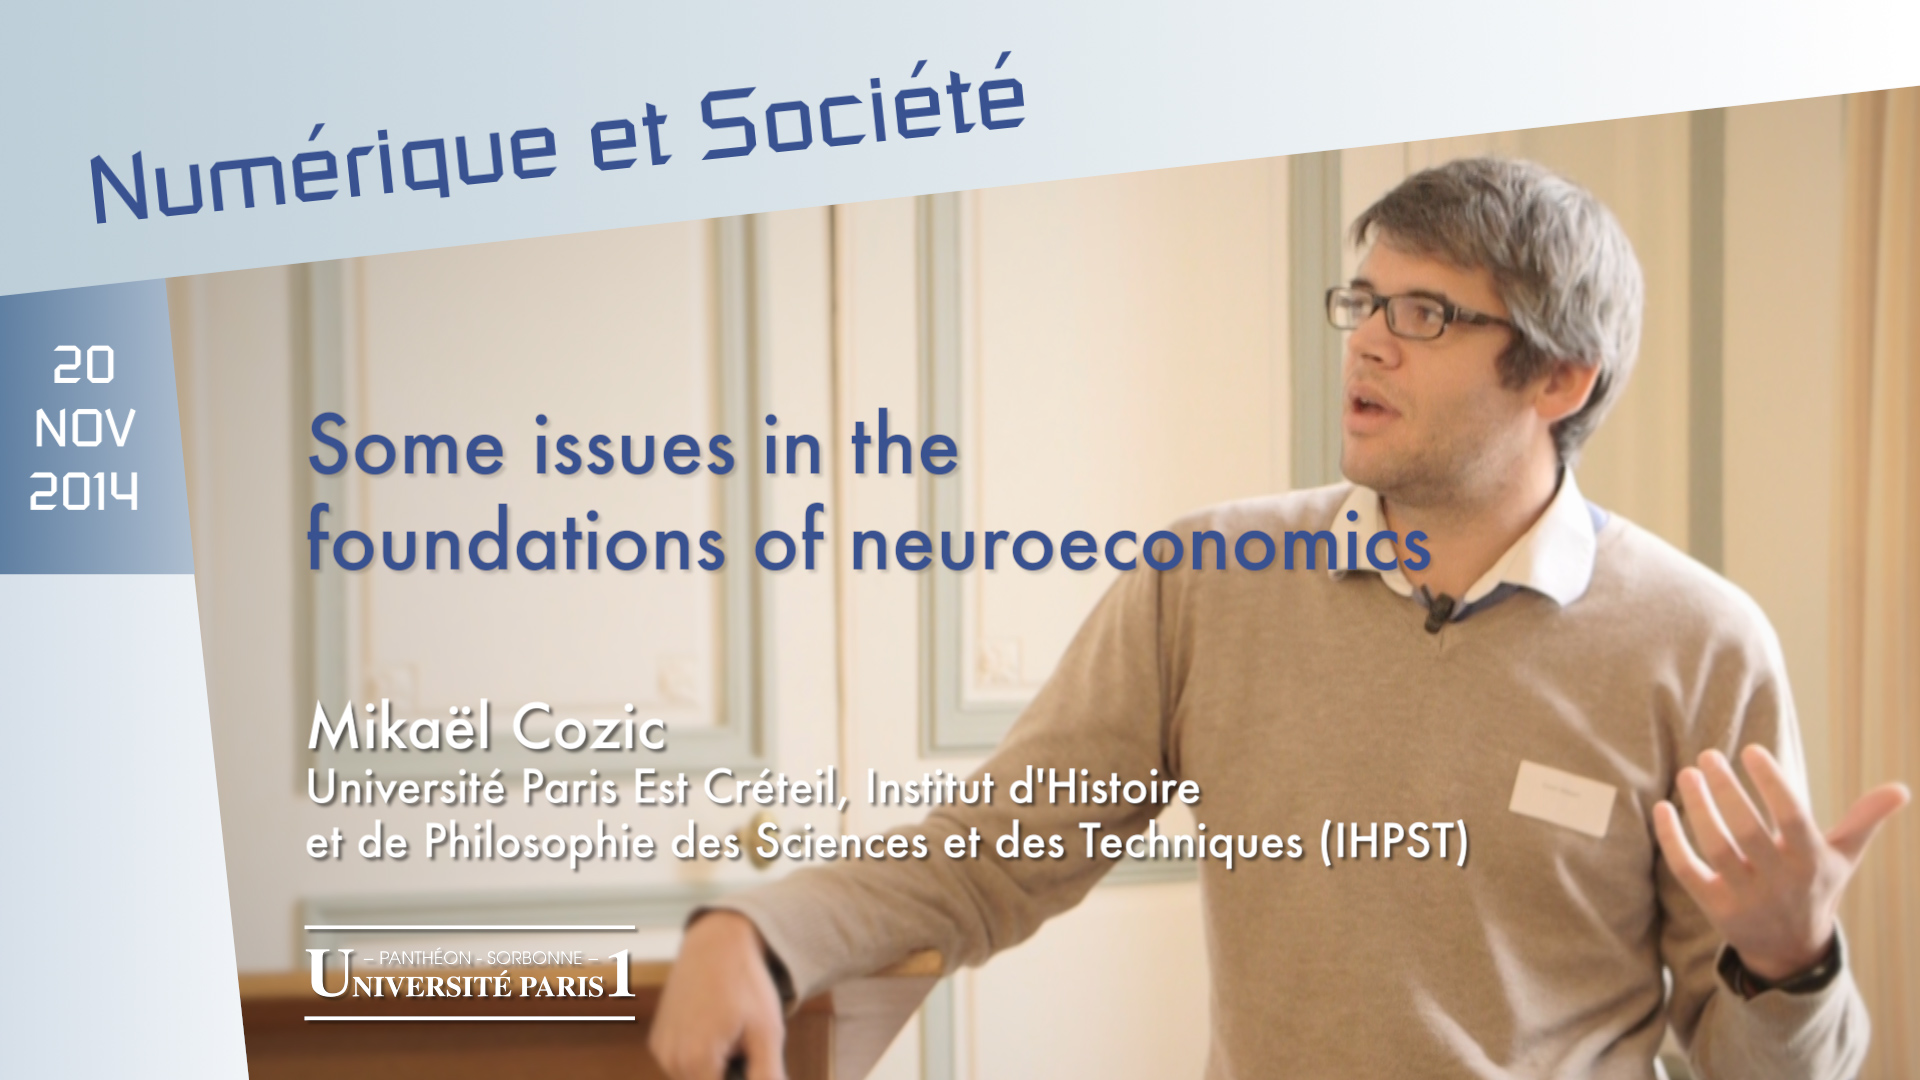 Some issues in the foundations of neuroeconomics